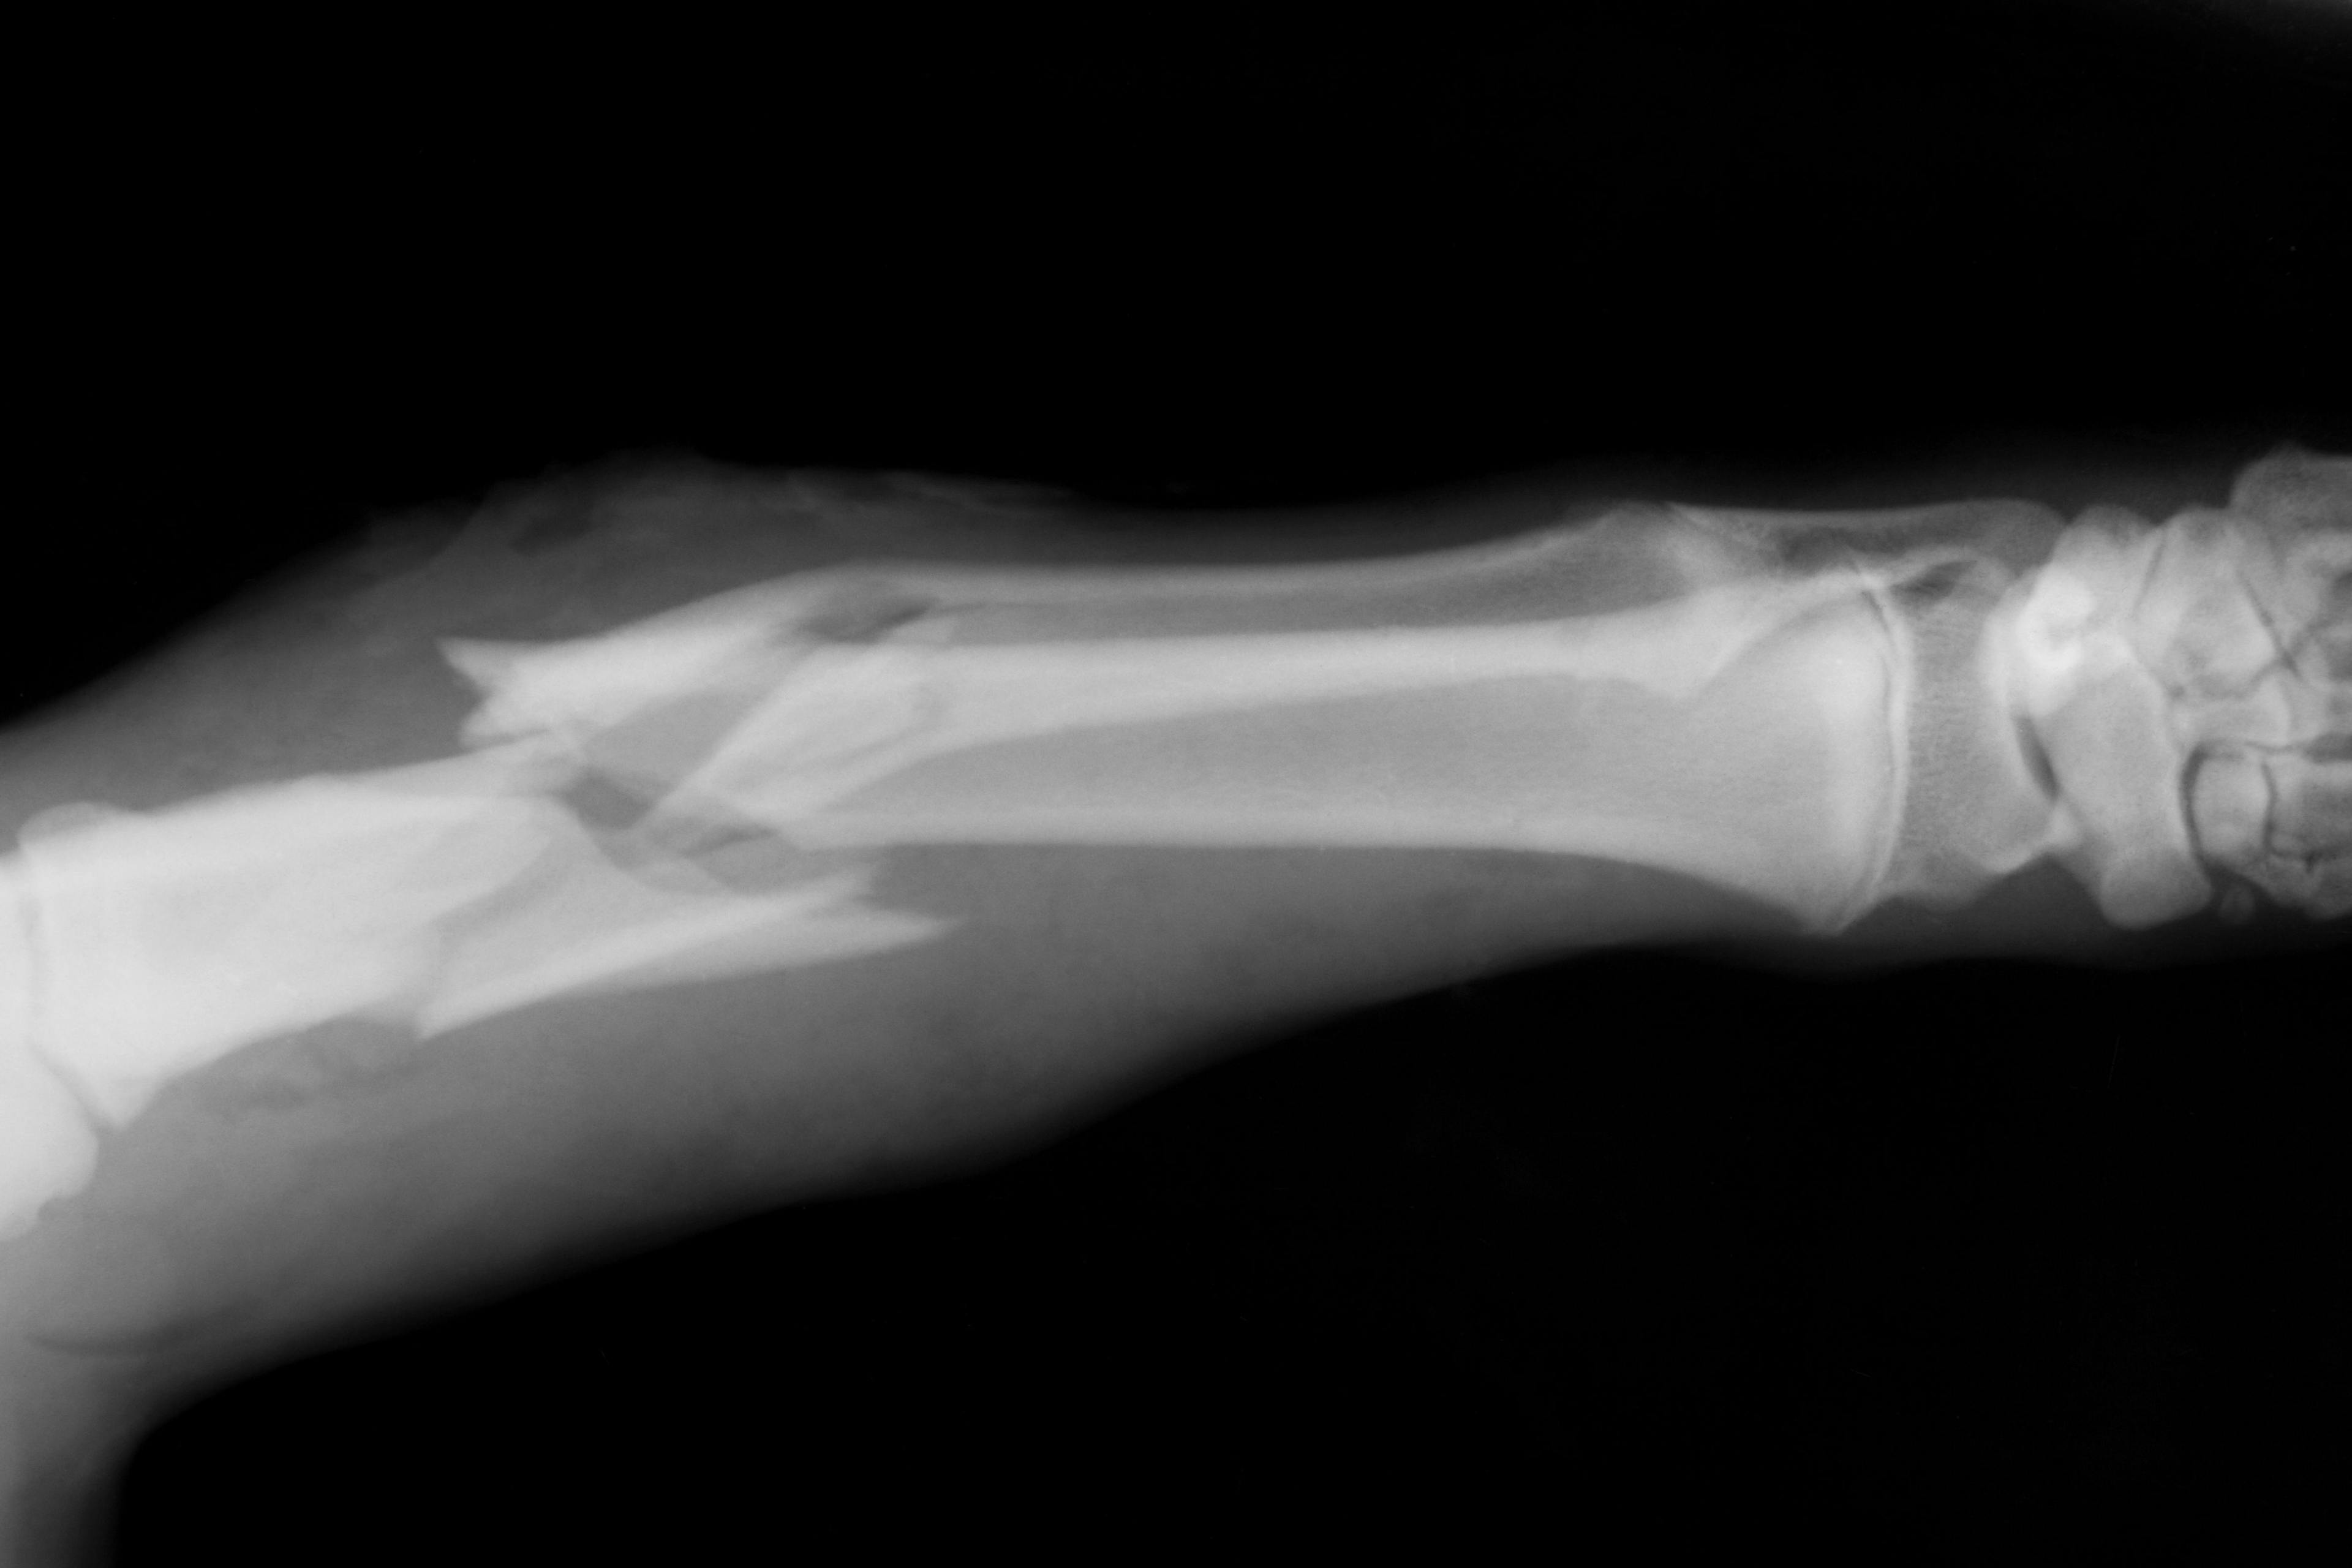 Bone Therapeutics Shifts Focus to Cell Therapies Following Phase 3 Fail in Knee Osteoarthritis 